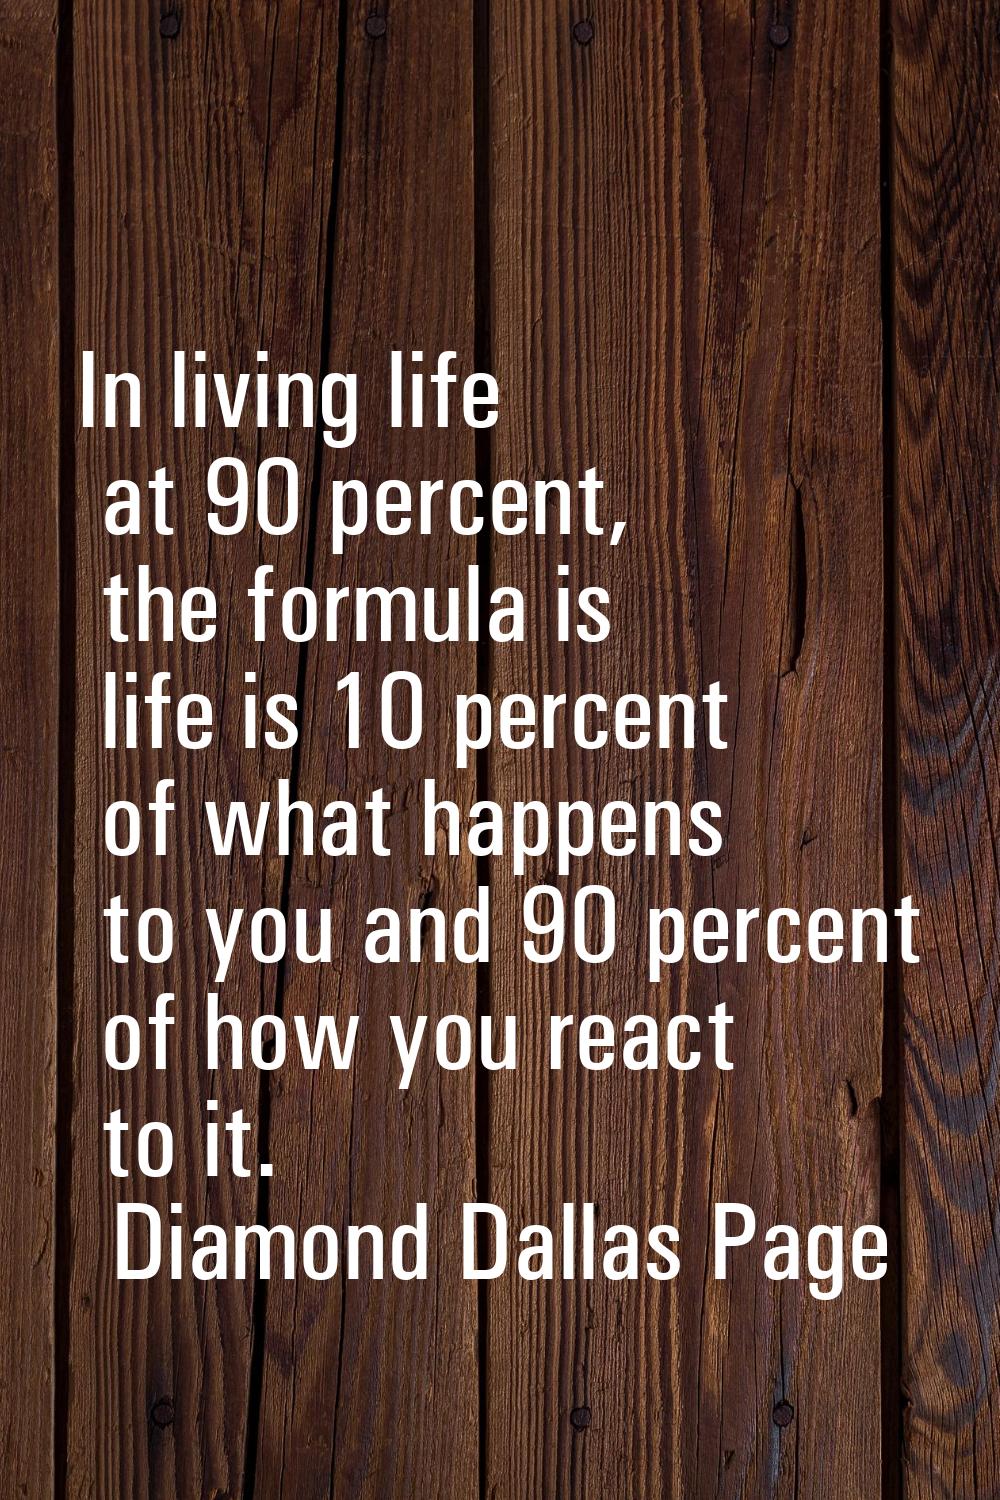 In living life at 90 percent, the formula is life is 10 percent of what happens to you and 90 perce